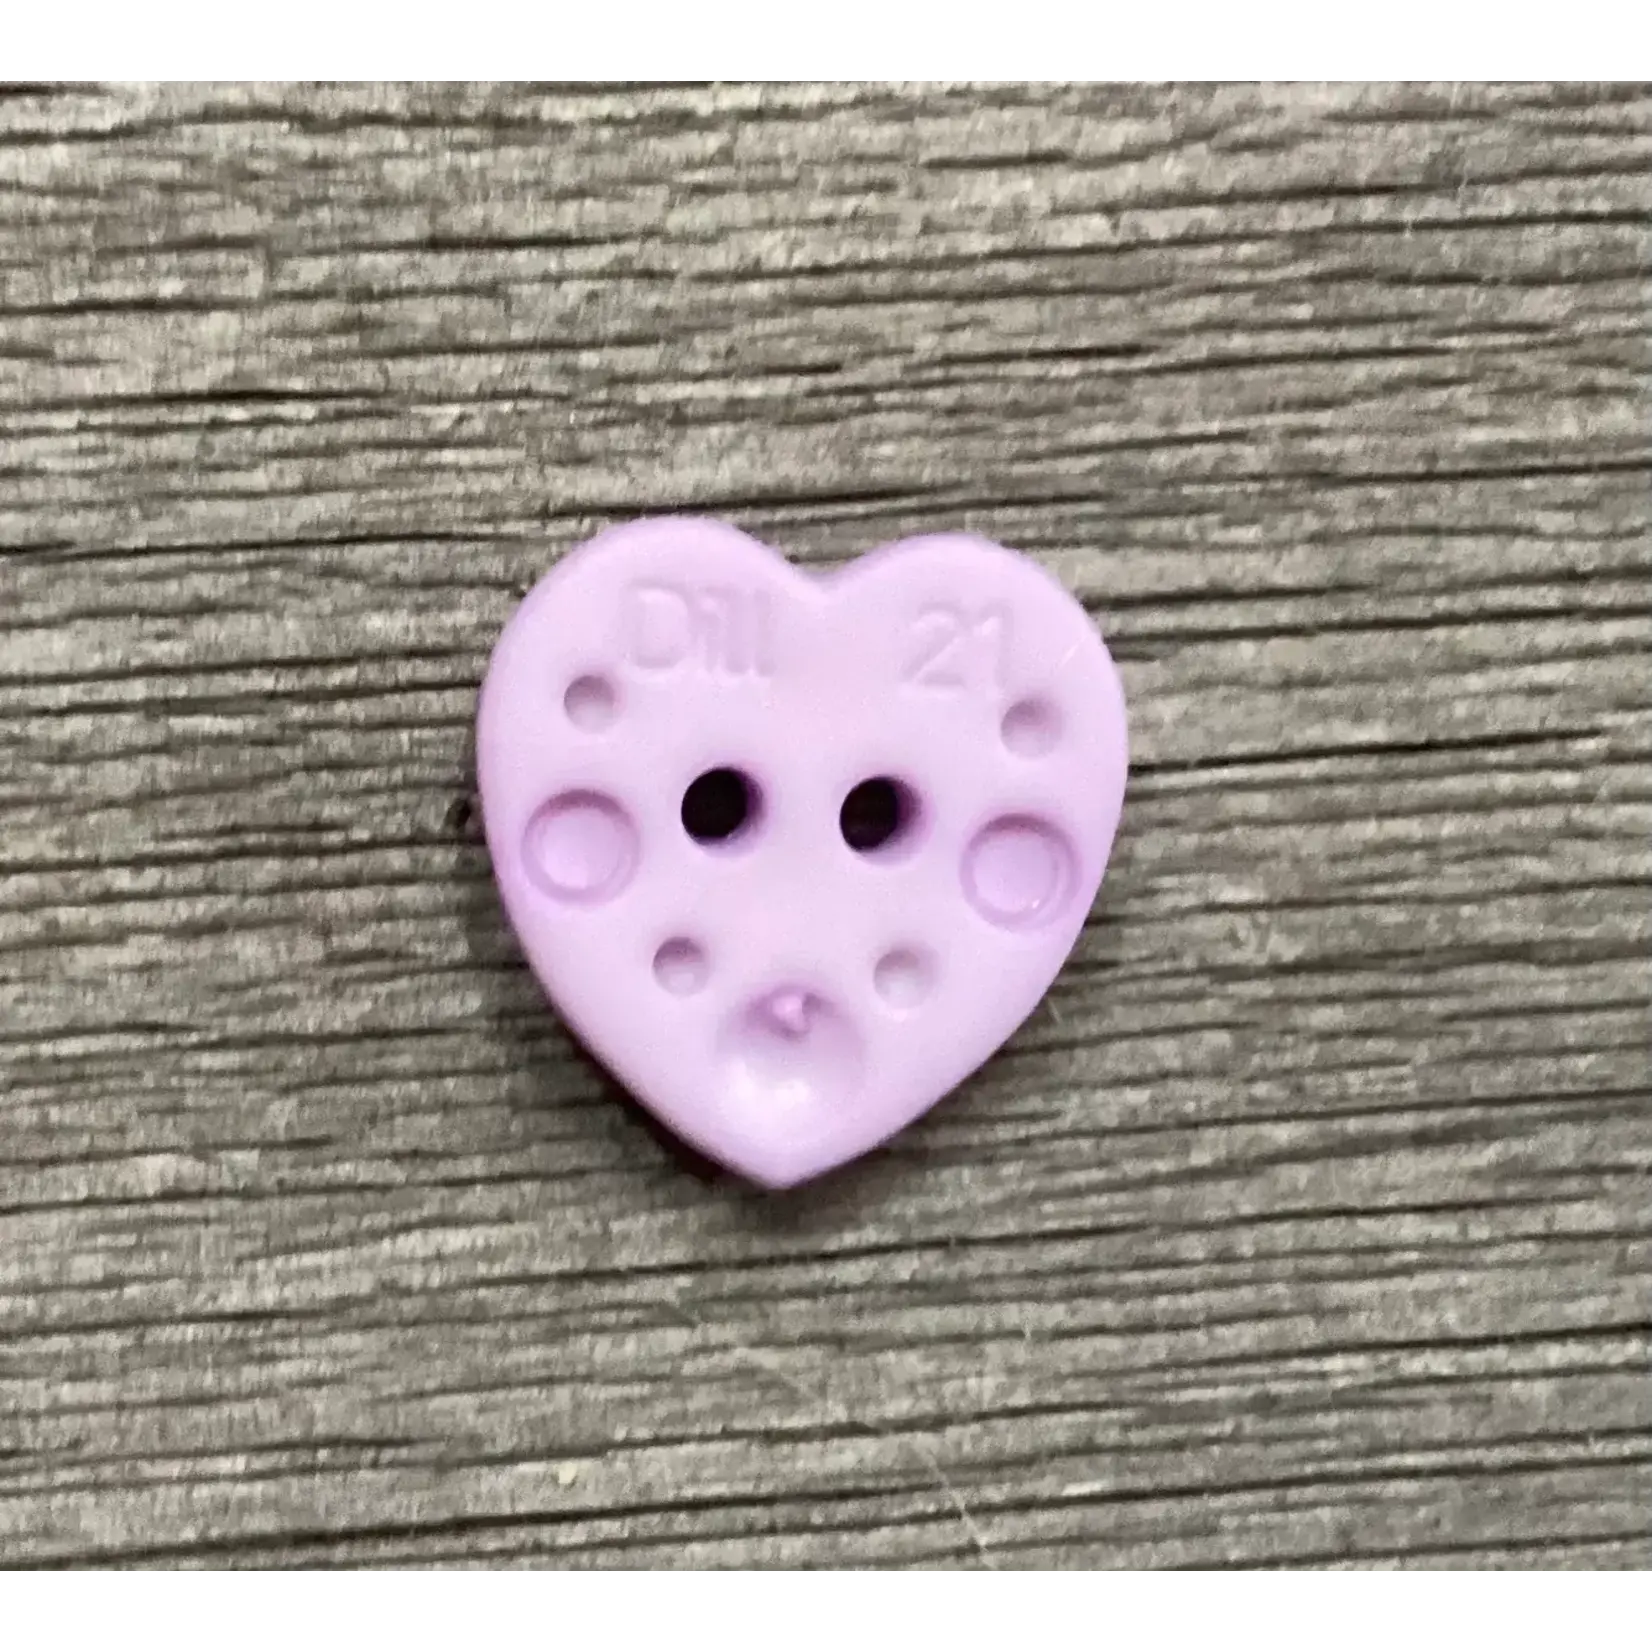 LILAC HEART Dill Button 122418 - Knit Knot & Natter